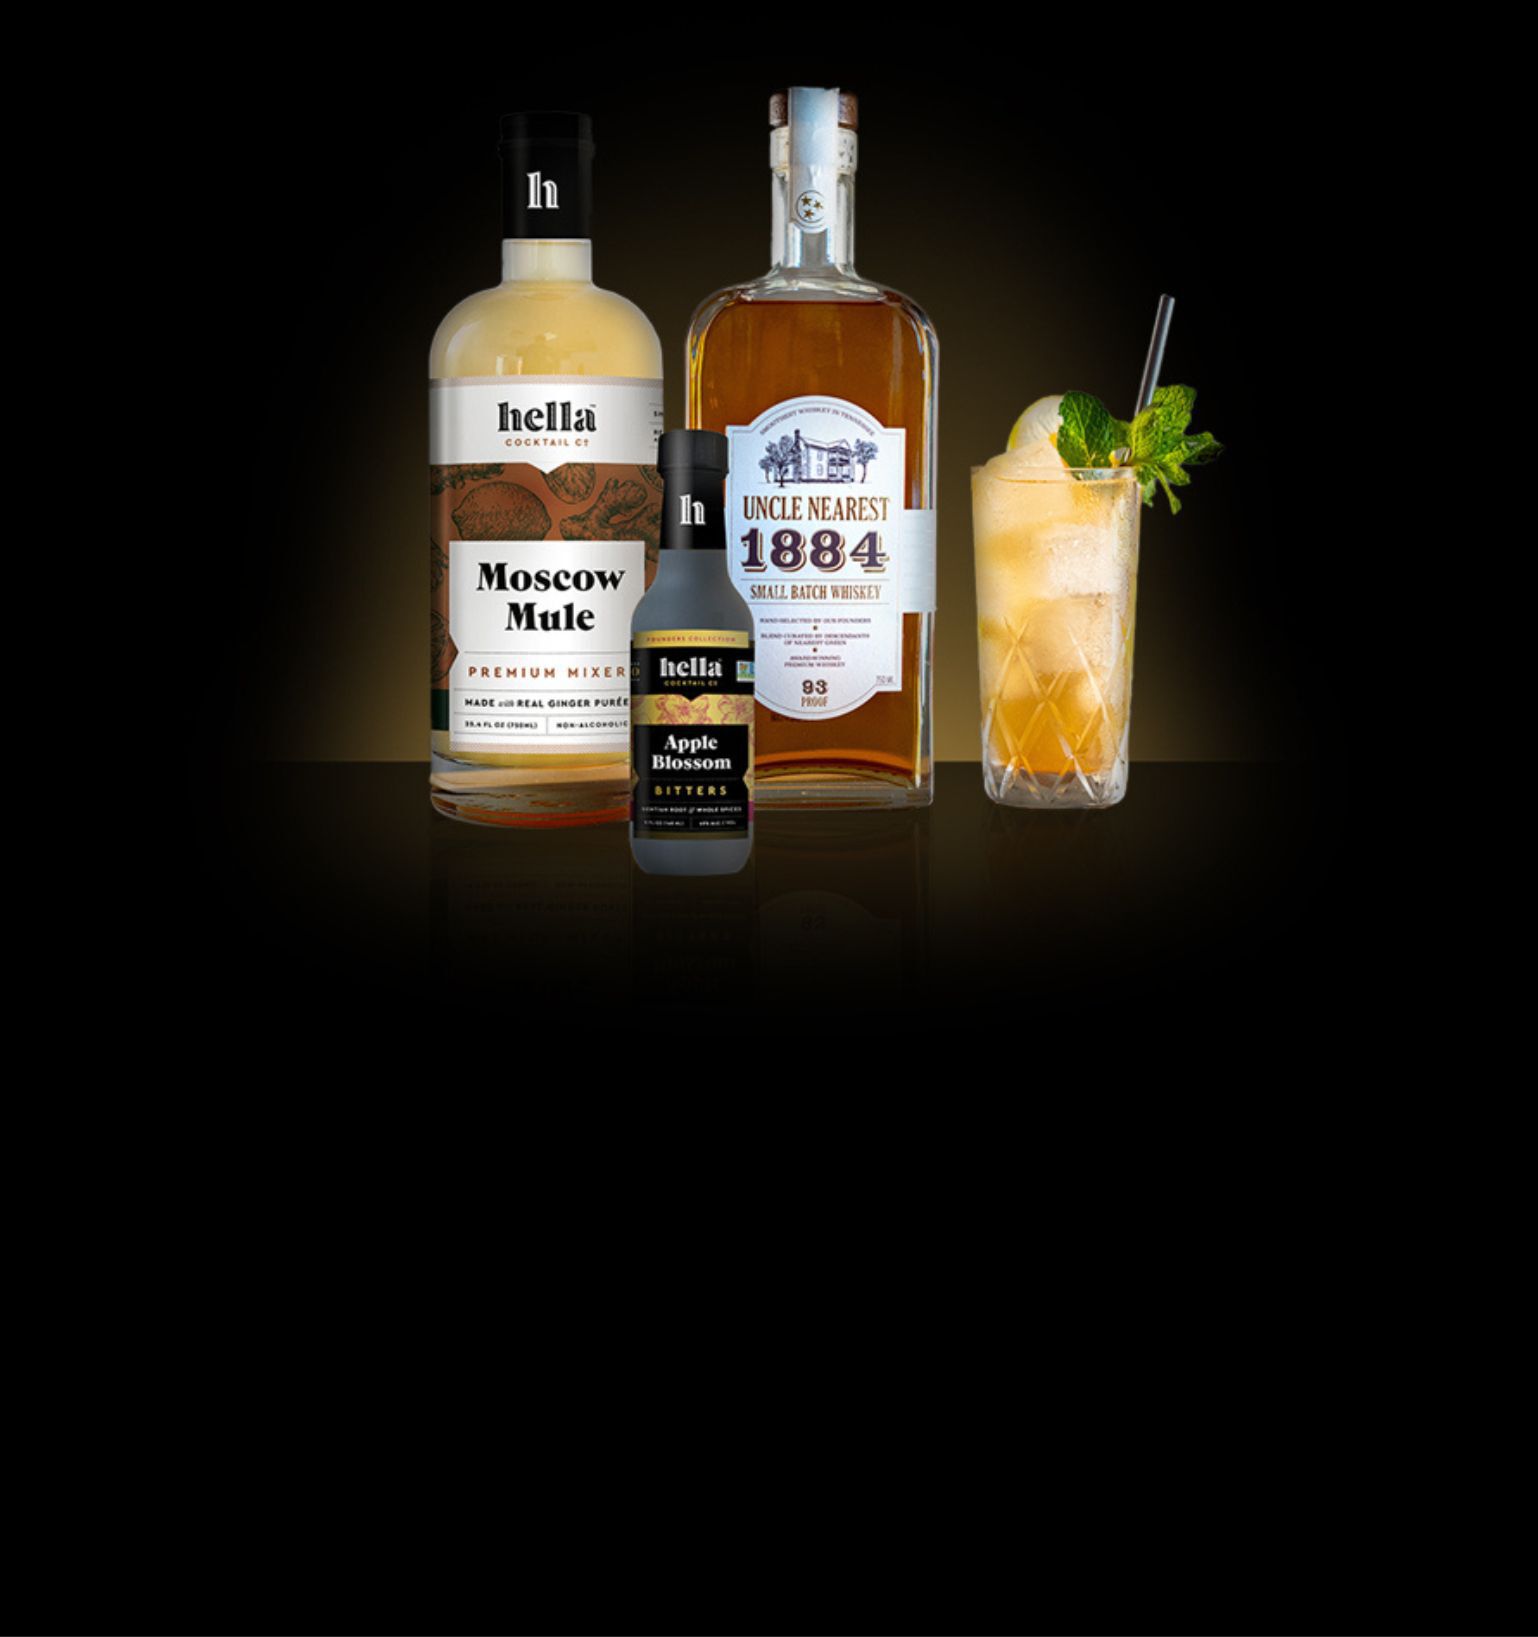 The Tennessee Mule Cocktail